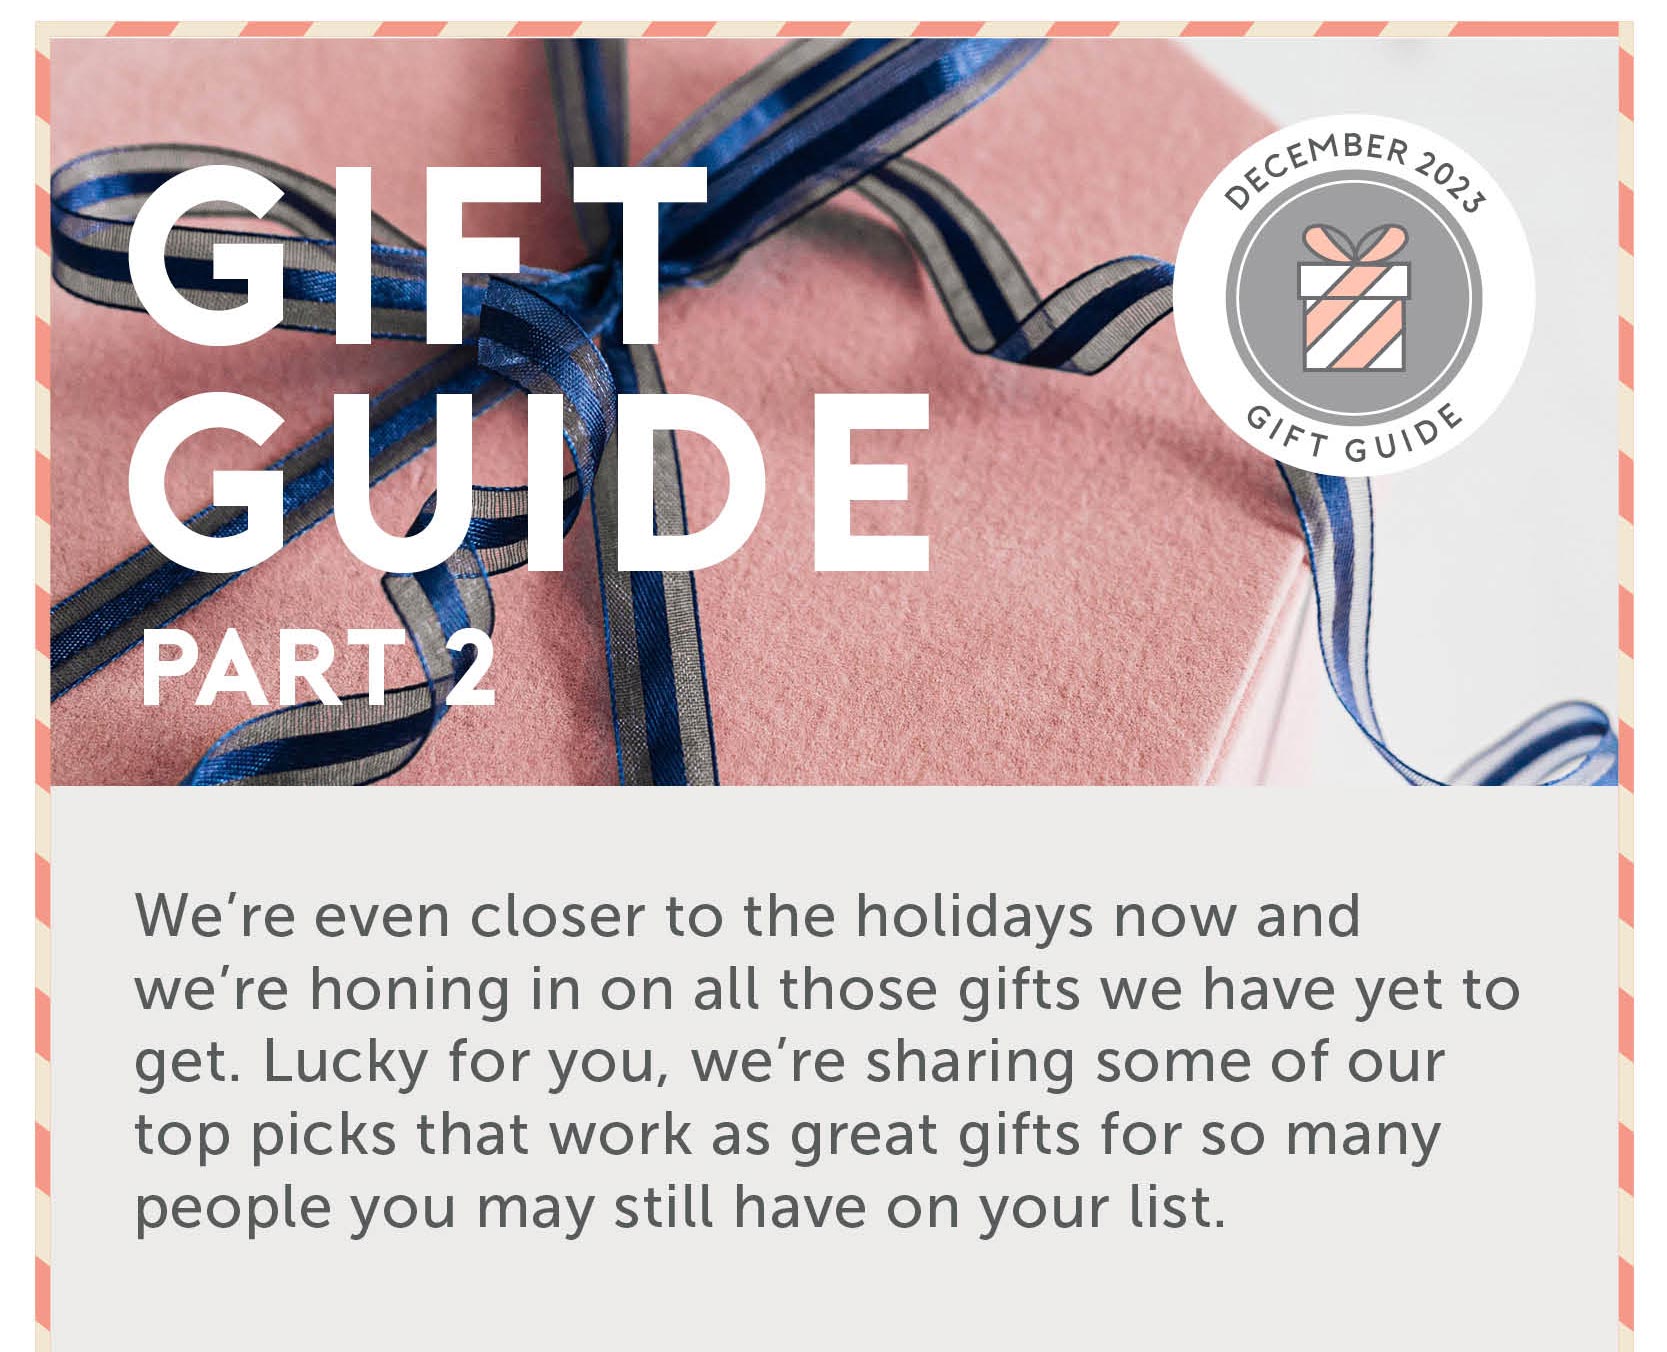 Gift Guide Part 2 We’re even closer to the holidays now and we’re honing in on all those gifts we have yet to get. Lucky for you, we’re sharing some of our top picks that work as great gifts for so many people you may still have on your list.